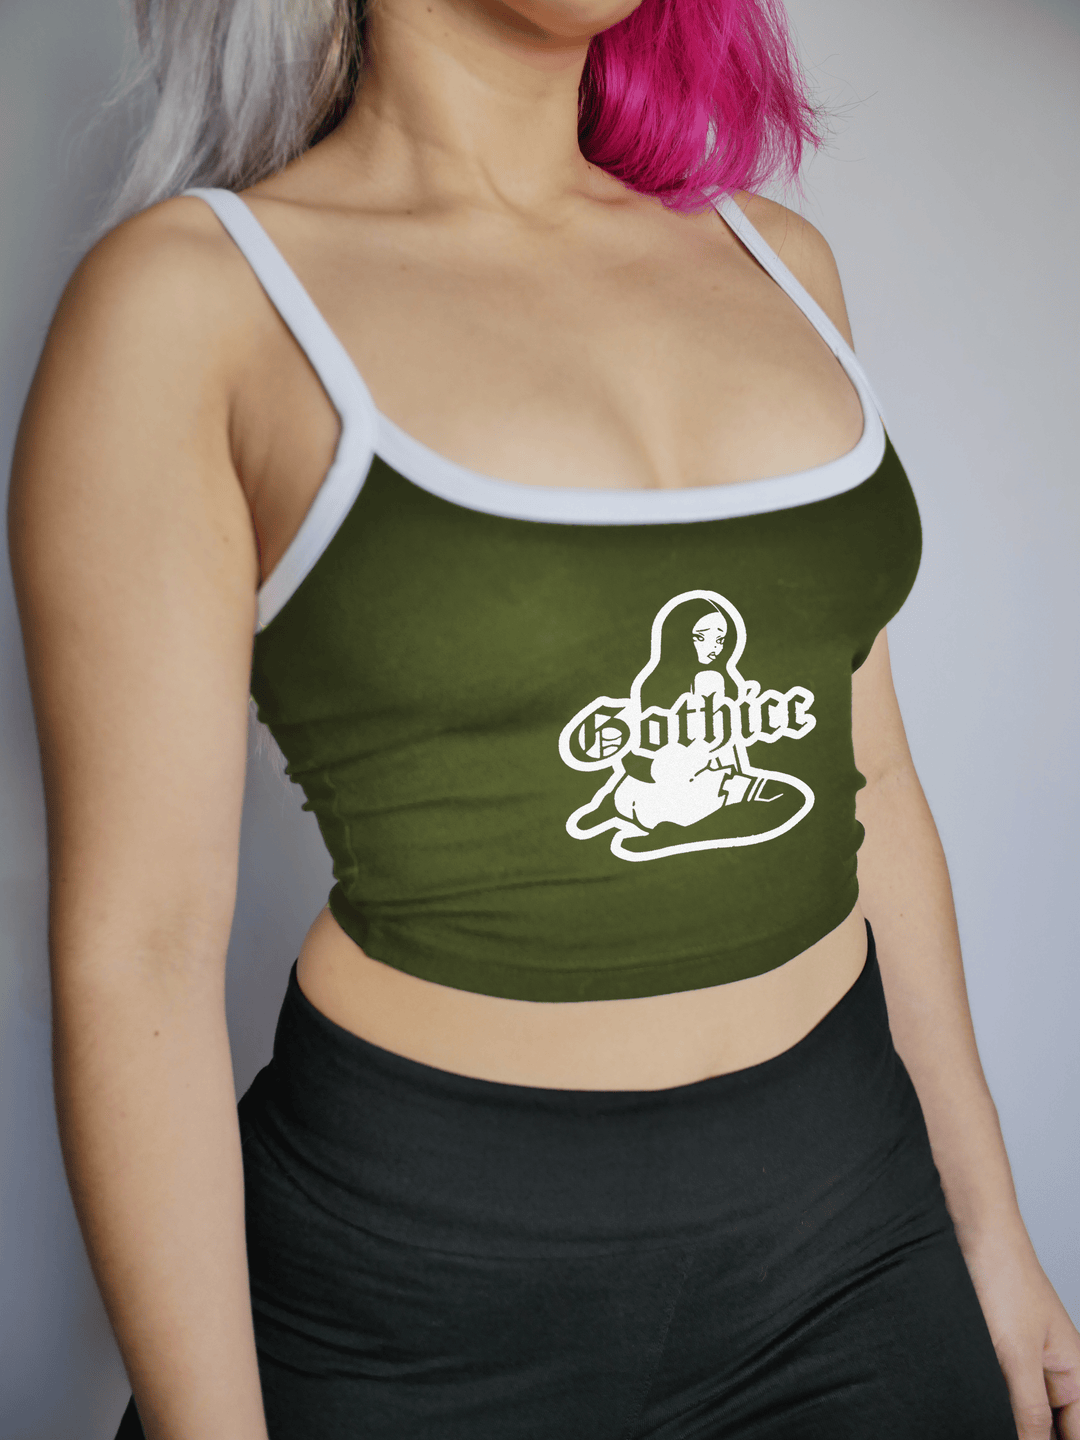 PixelThat Punderwear Tops Olive / Small Gothicc Crop Top